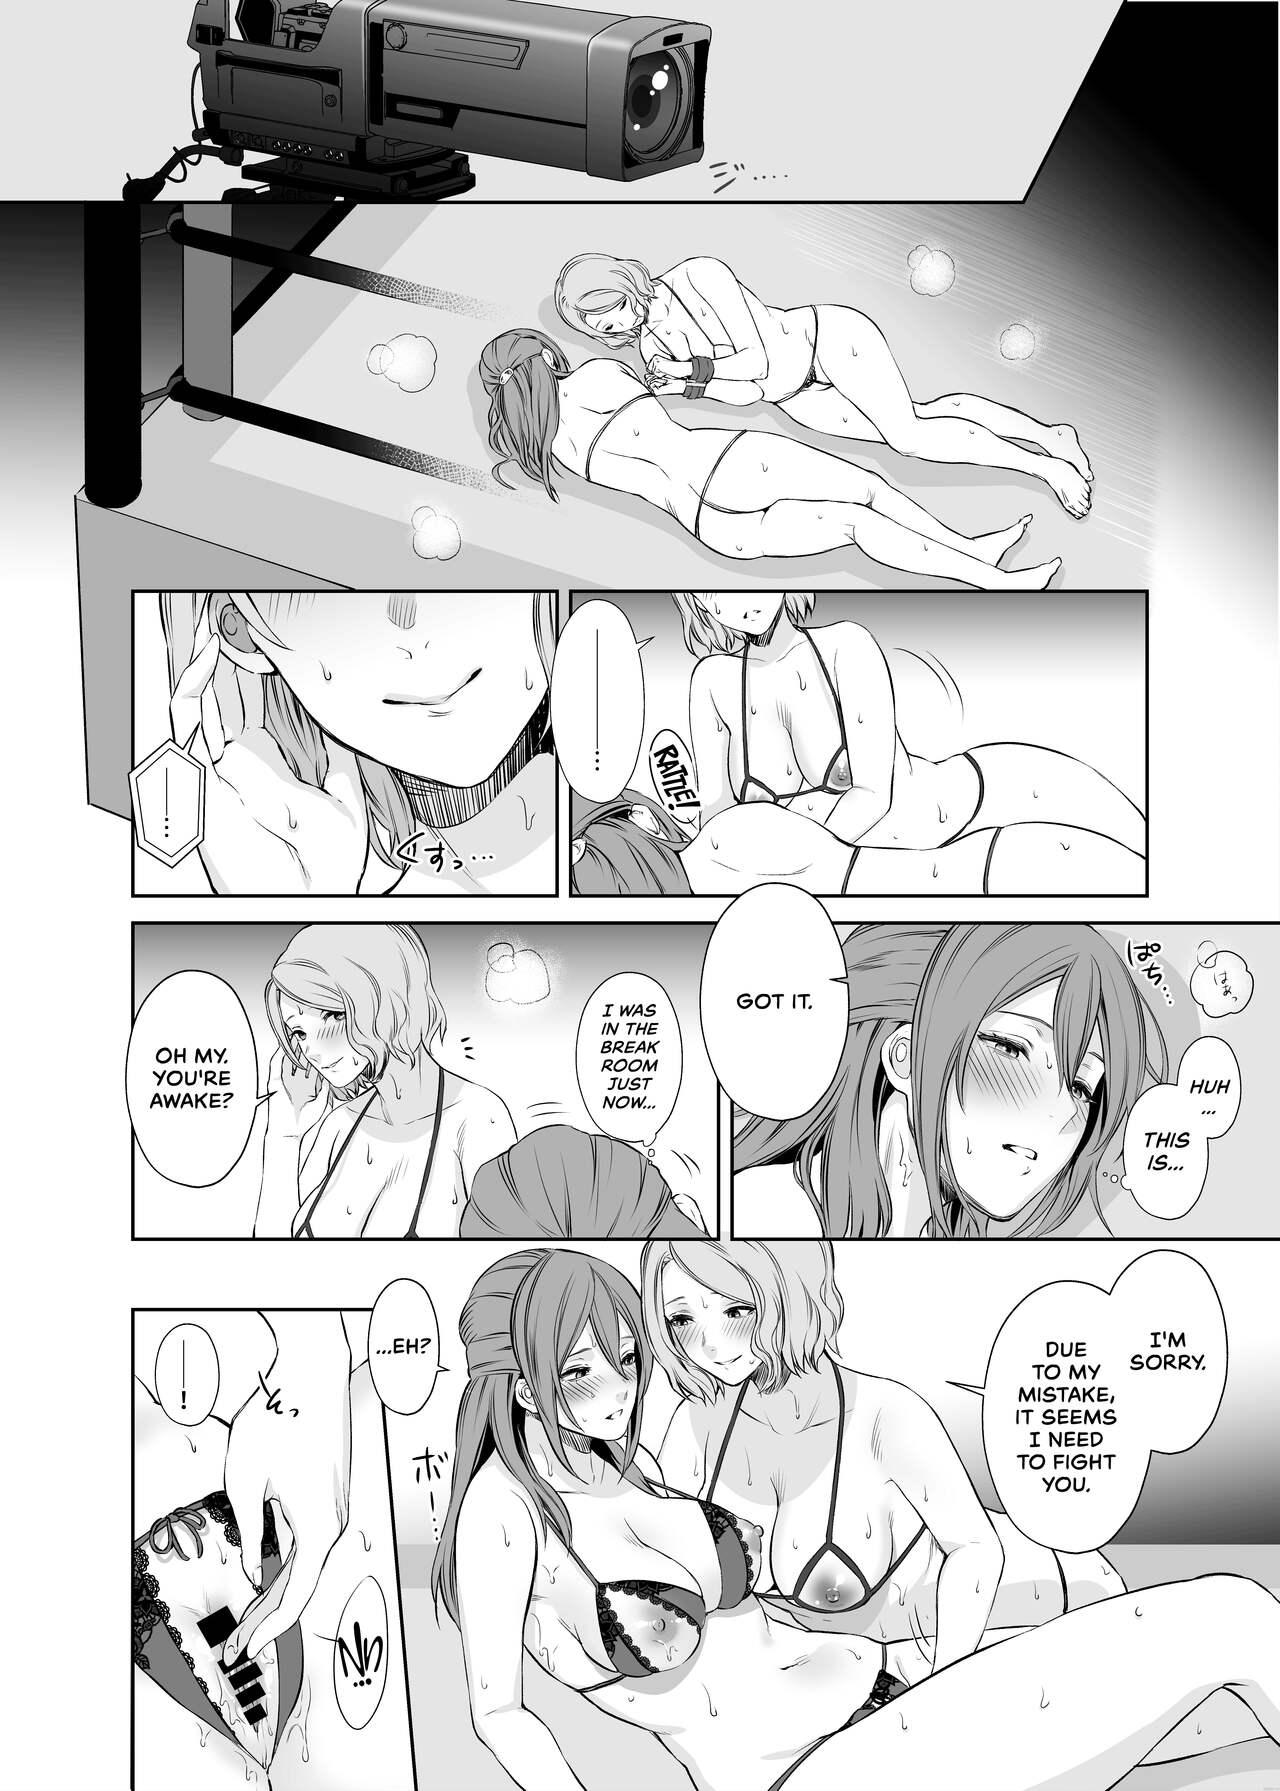 Thot [Remora Works (Meriko)] LesFes Co -Candid Reporting- Vol. 003 [English] - Original Amateur - Page 7